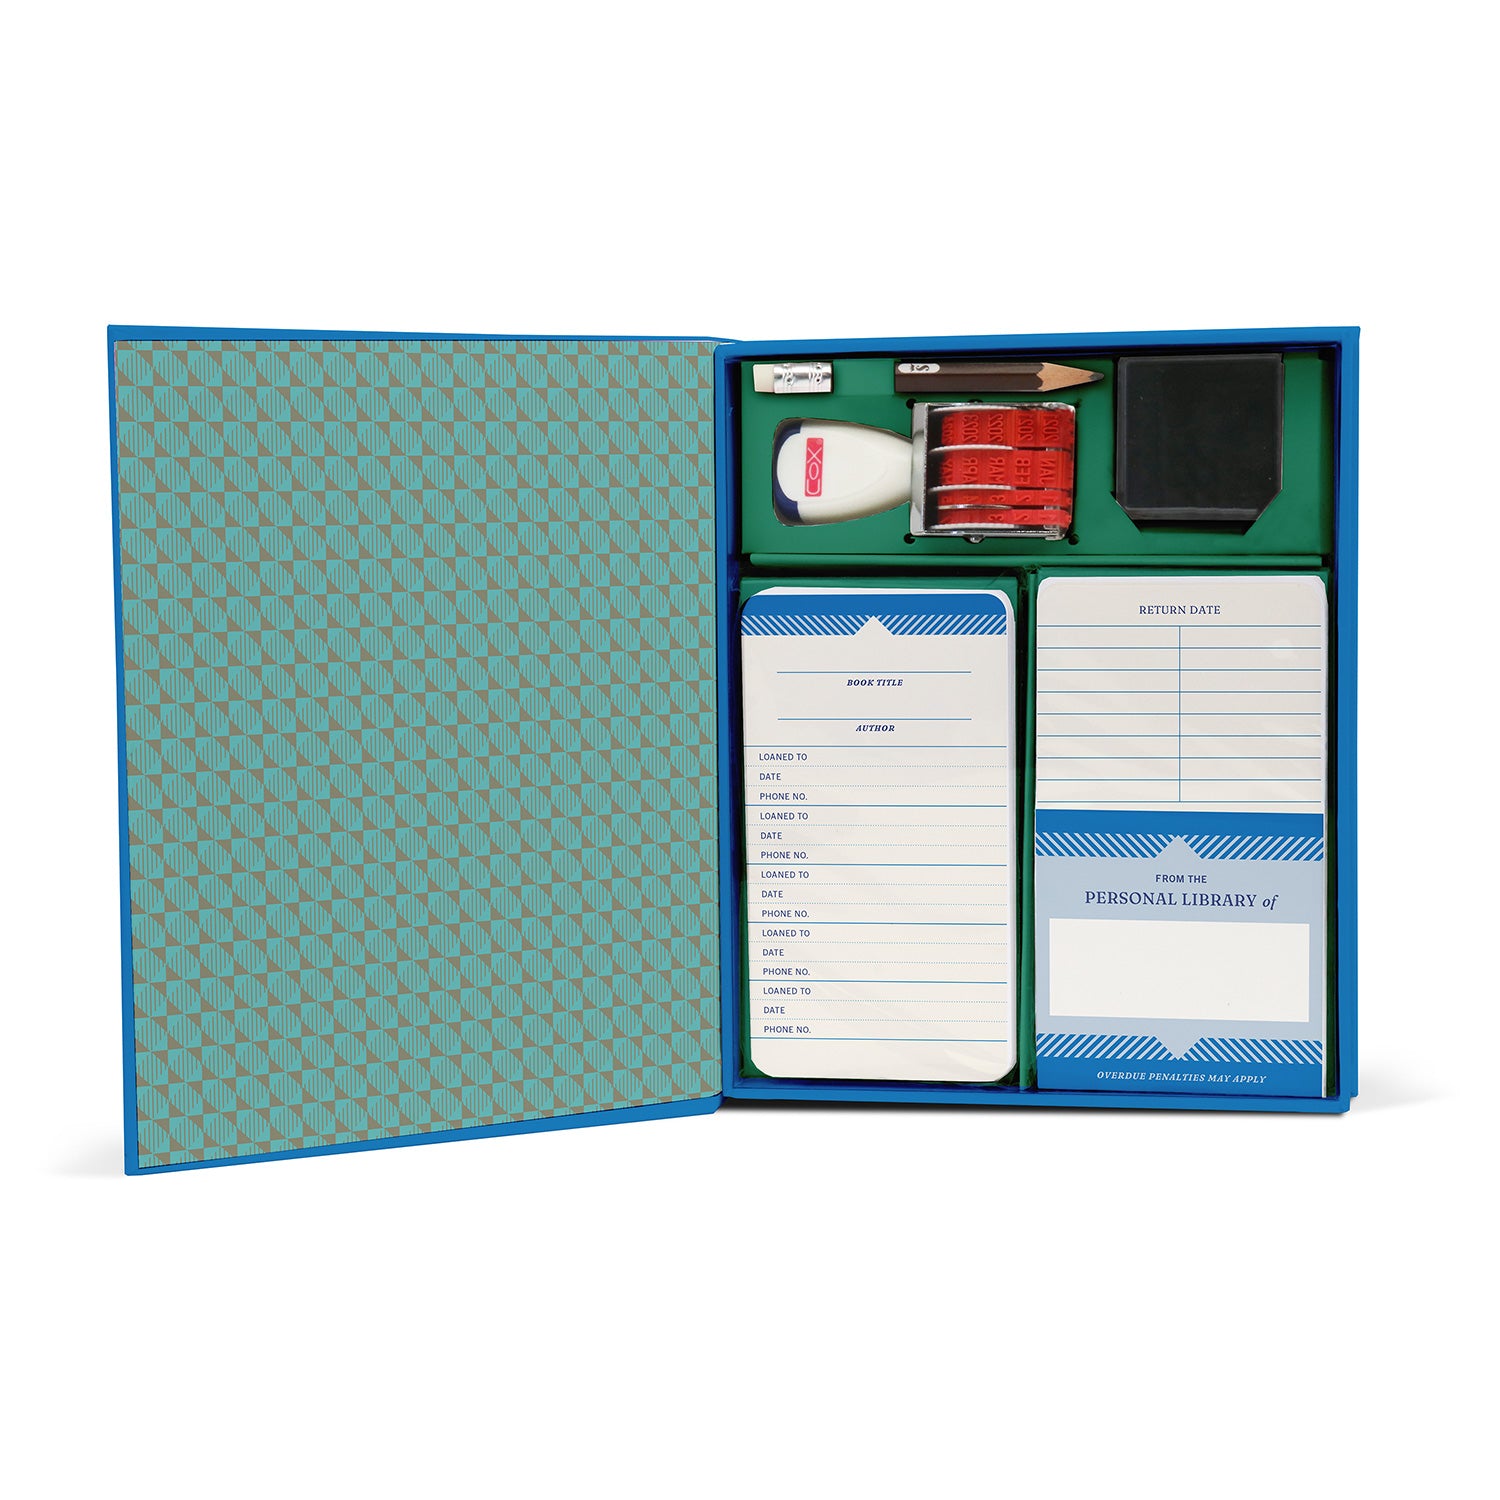  Knock Knock Self-Help Edition Personal Library Kit & Gift for  Book Lovers - Card Catalog Checkout Cards, Bookplates, Date Stamp & Inkpad  6 x 7.5 x 1.25 inches : Office Products